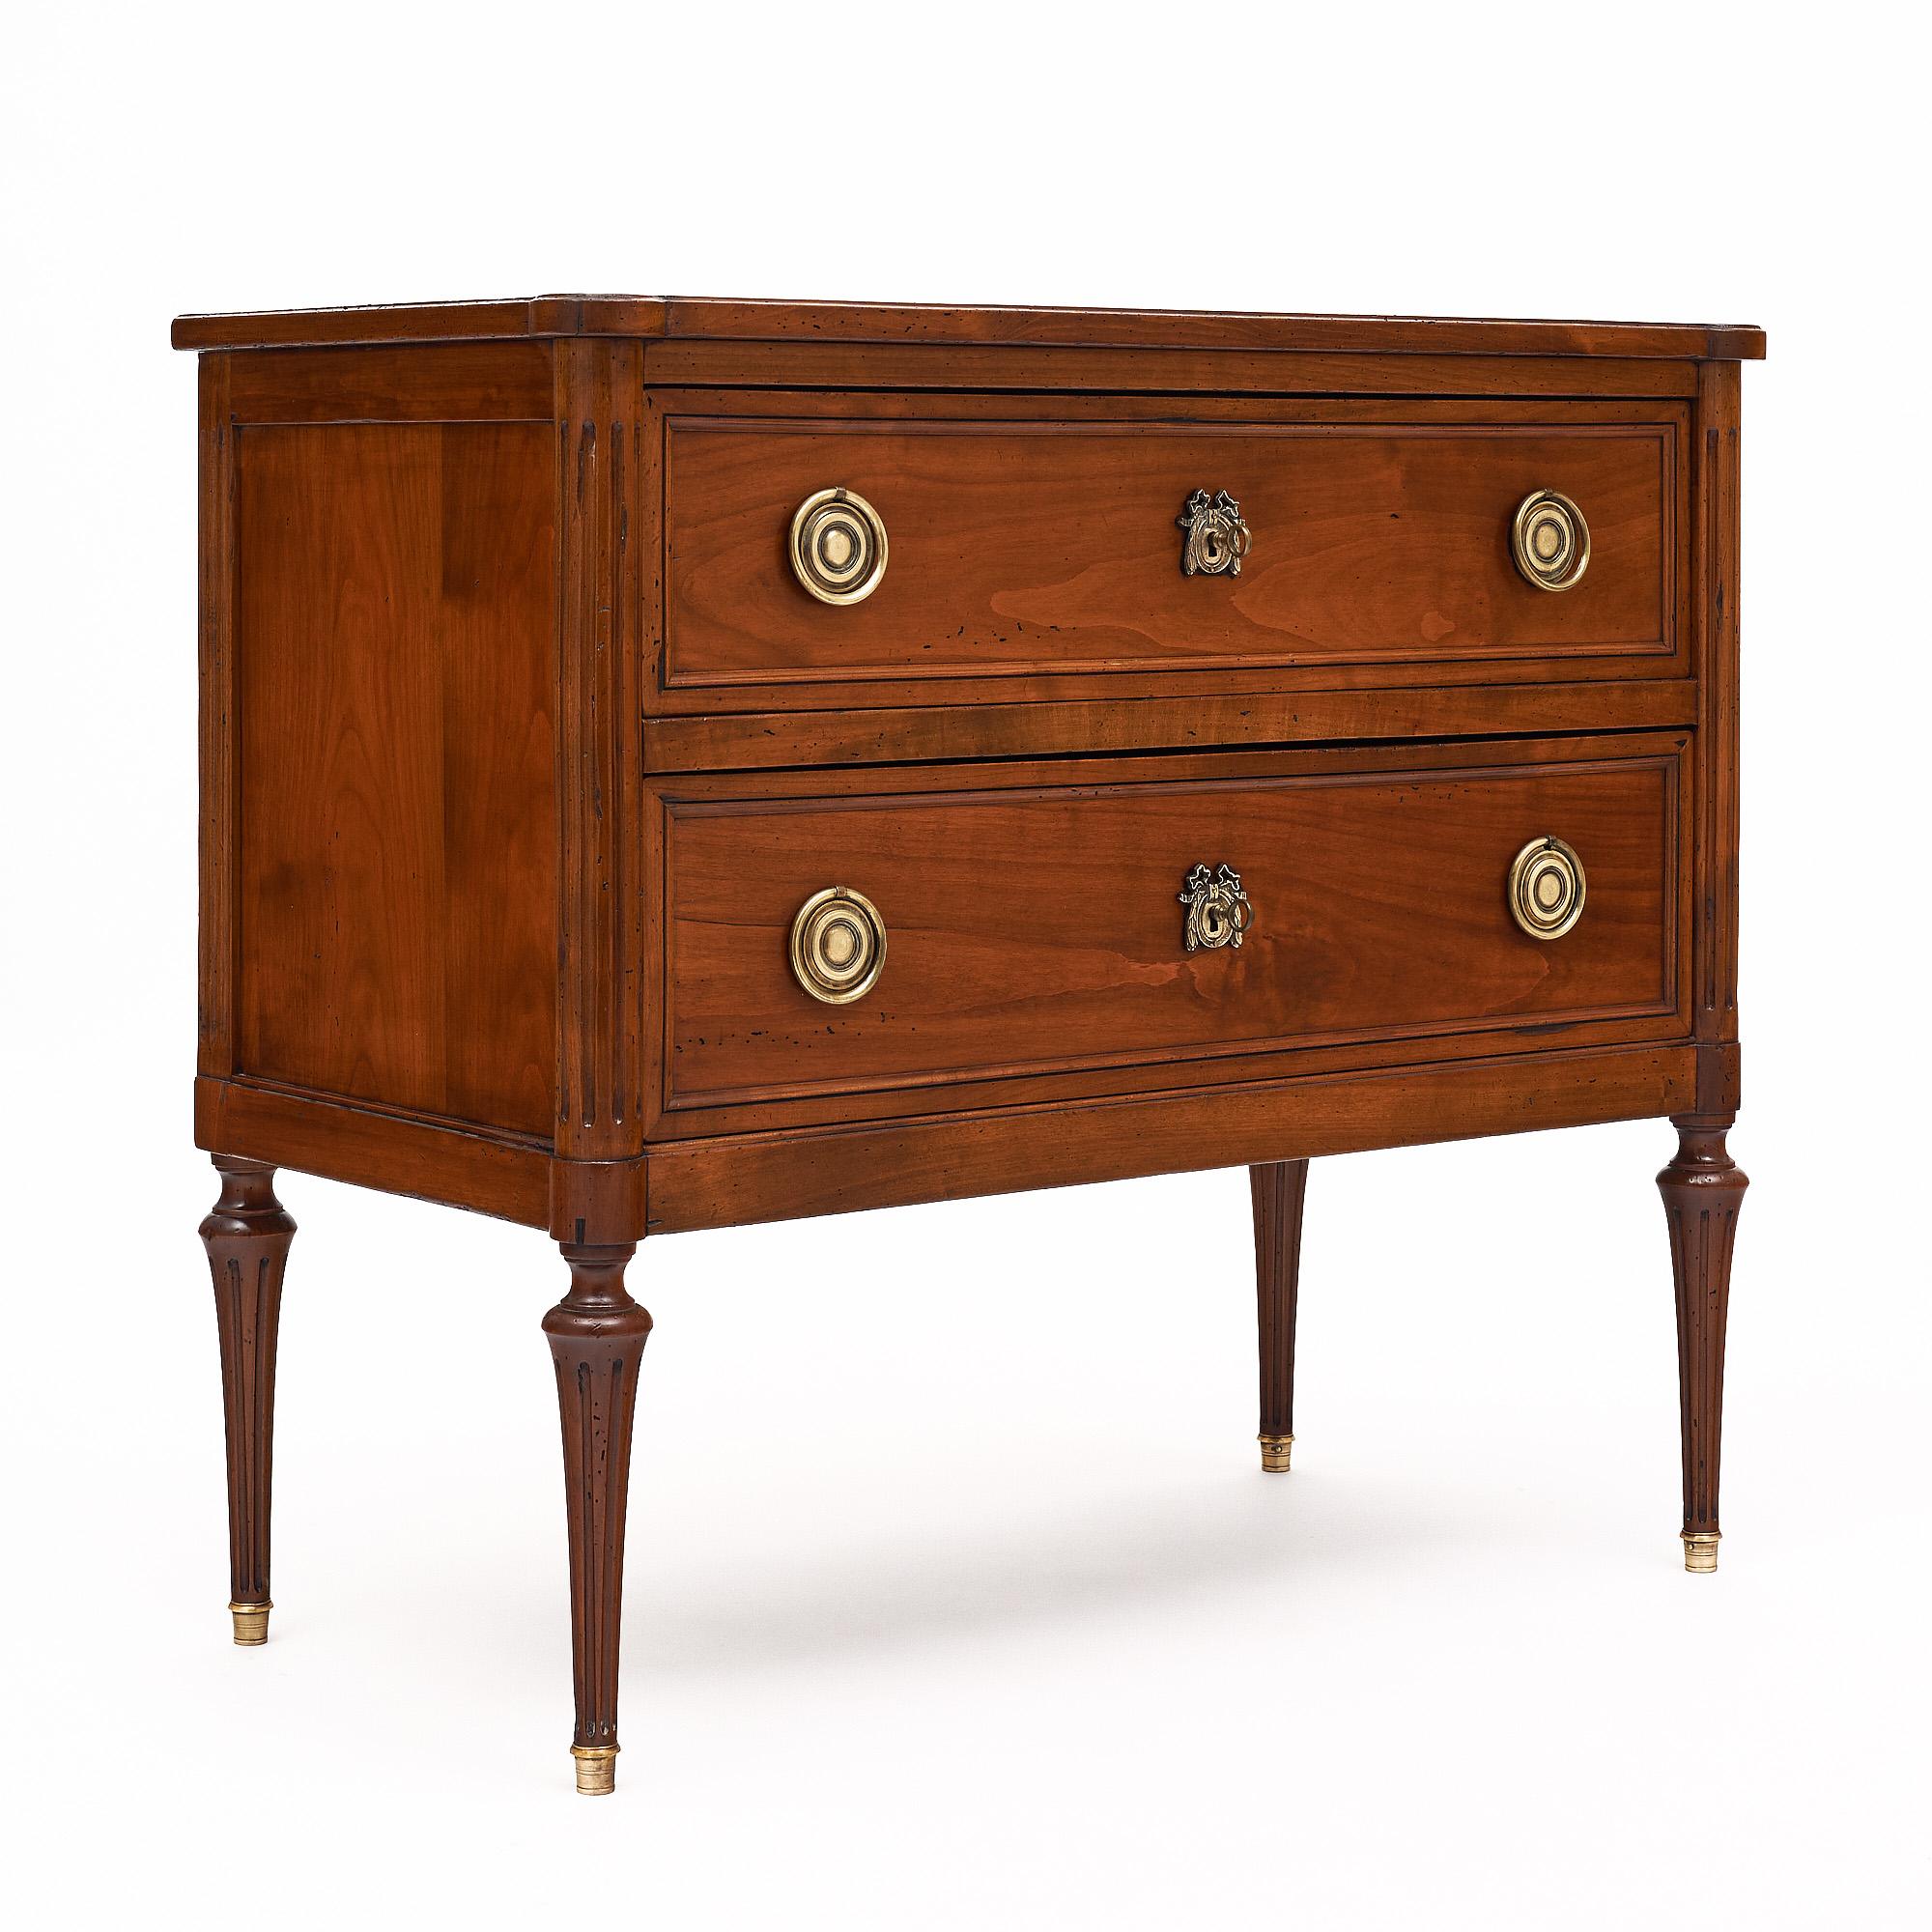 Petite chest of drawers from France in the Louis XVI style. This piece is made of cherry wood that has been finished with a lustrous French polish of museum quality. There are two dovetailed drawers with original cast brass hardware and locks. The